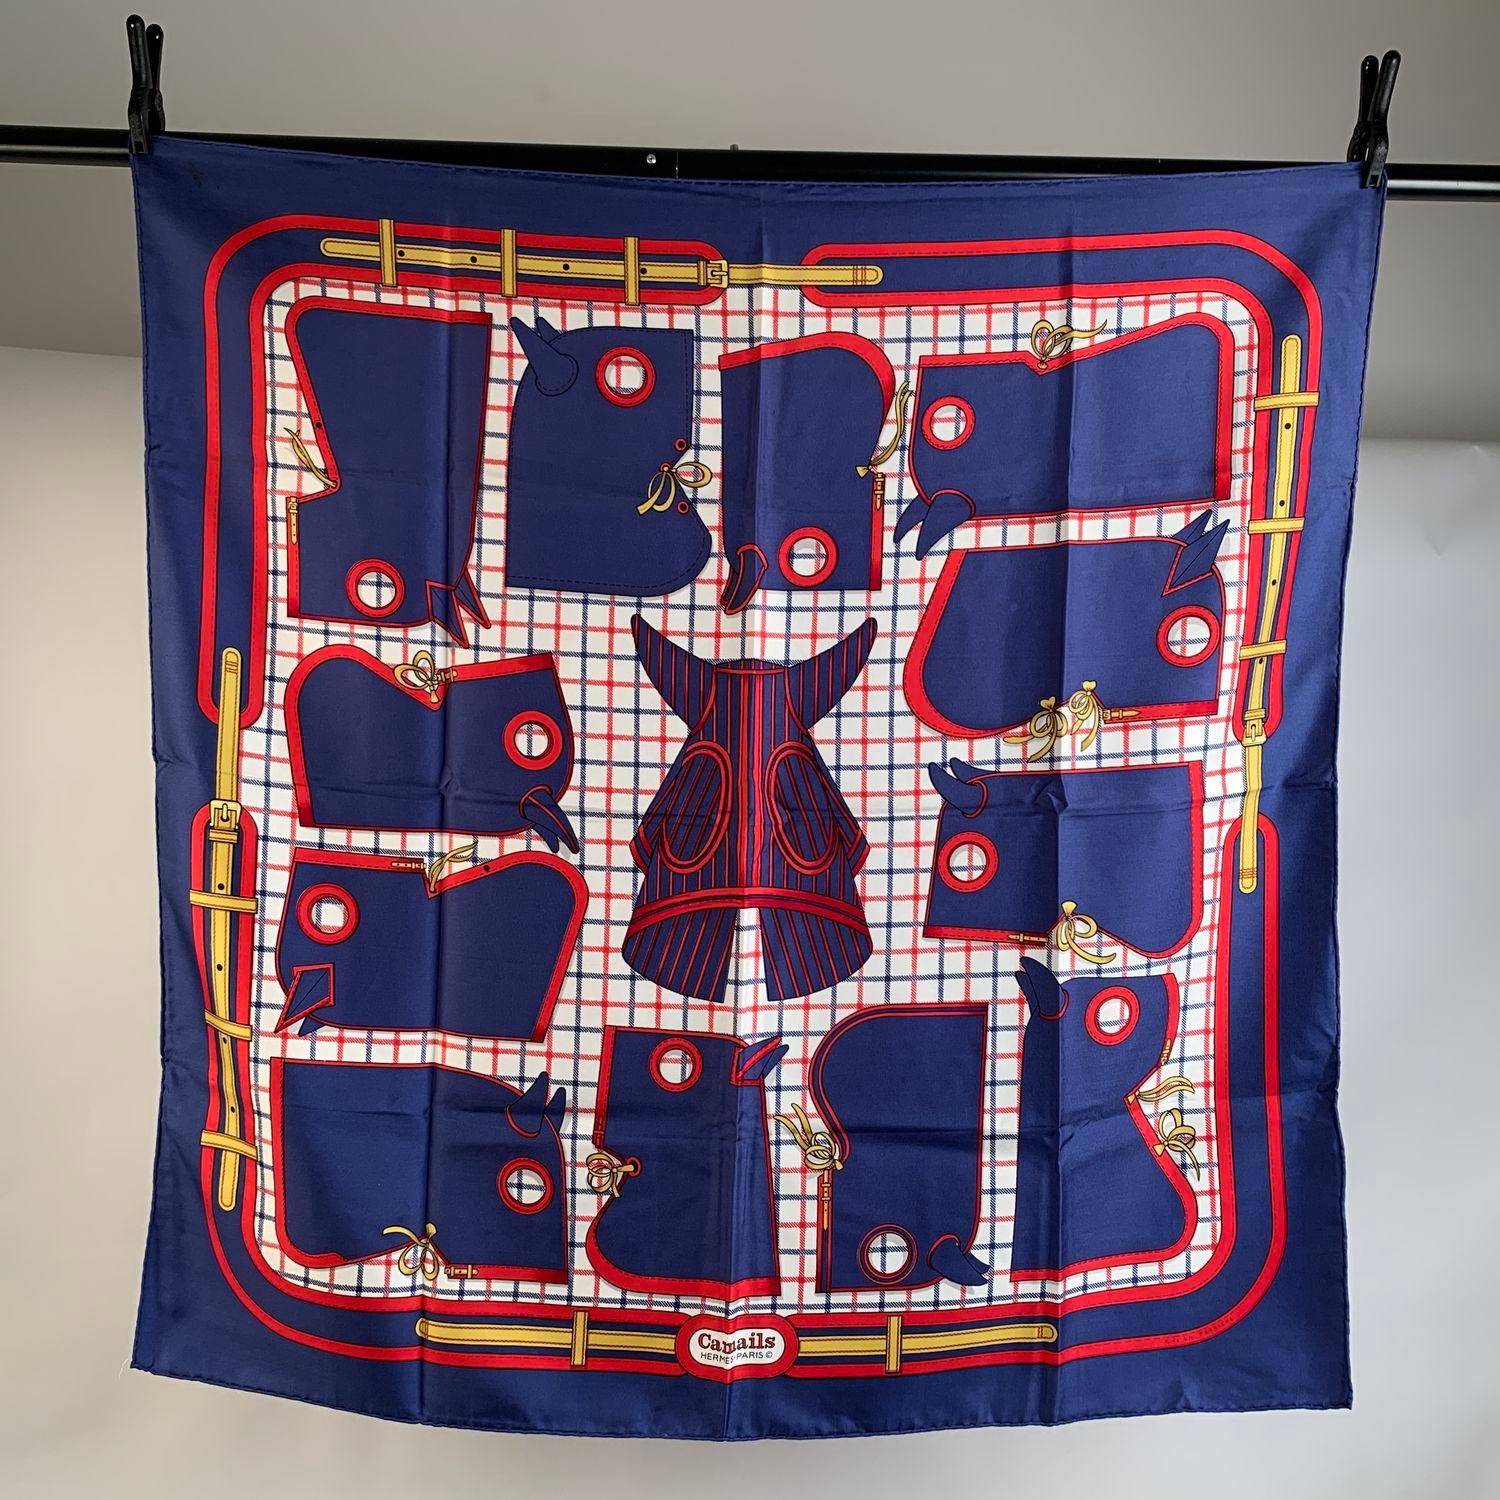 Beautiful Hermes 'Camails' silk scarf designed by Francoise de la Perriere and originally issued in 1974. The design depicts some horse hoods in blue and red color against a checkered white background. Blue border. Hand rolled edges. Measurements: